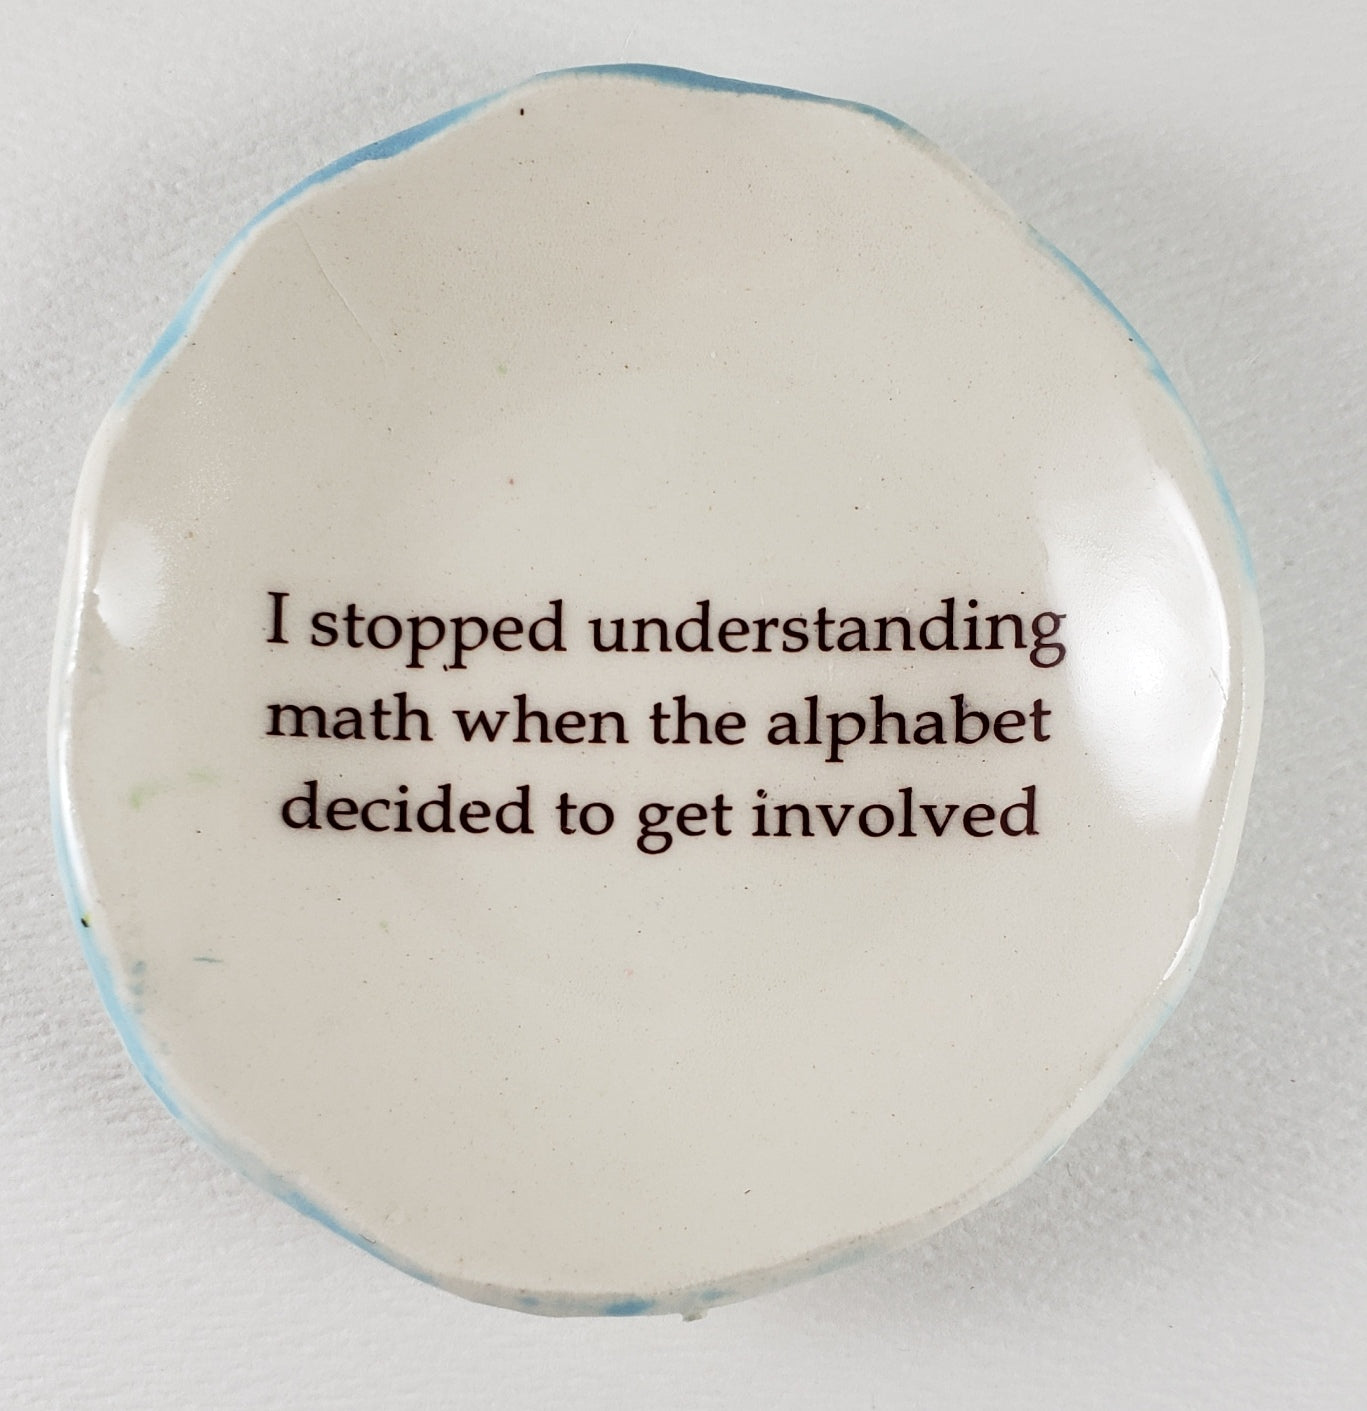 Tiny Plate with "I stopped understanding math..."